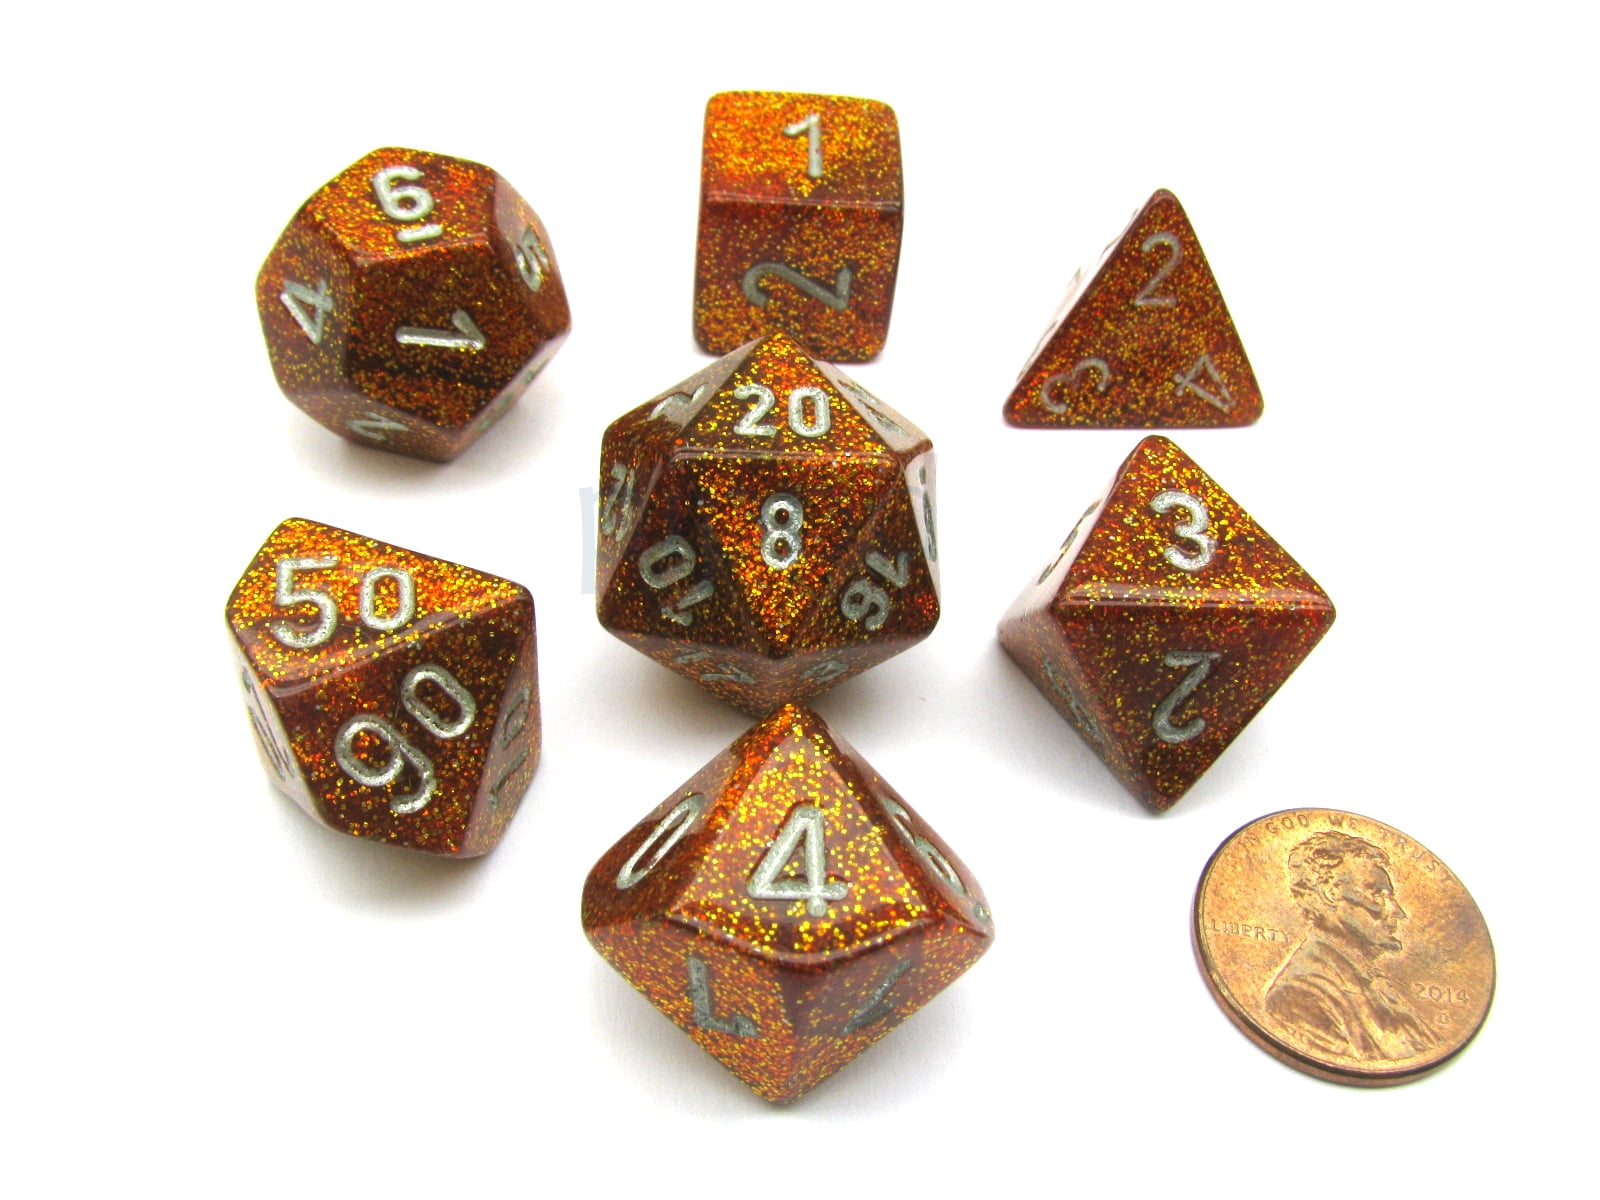 RPG D&D Chessex Dice Glitter Gold w/ Silver Poly Set of 7-27503 